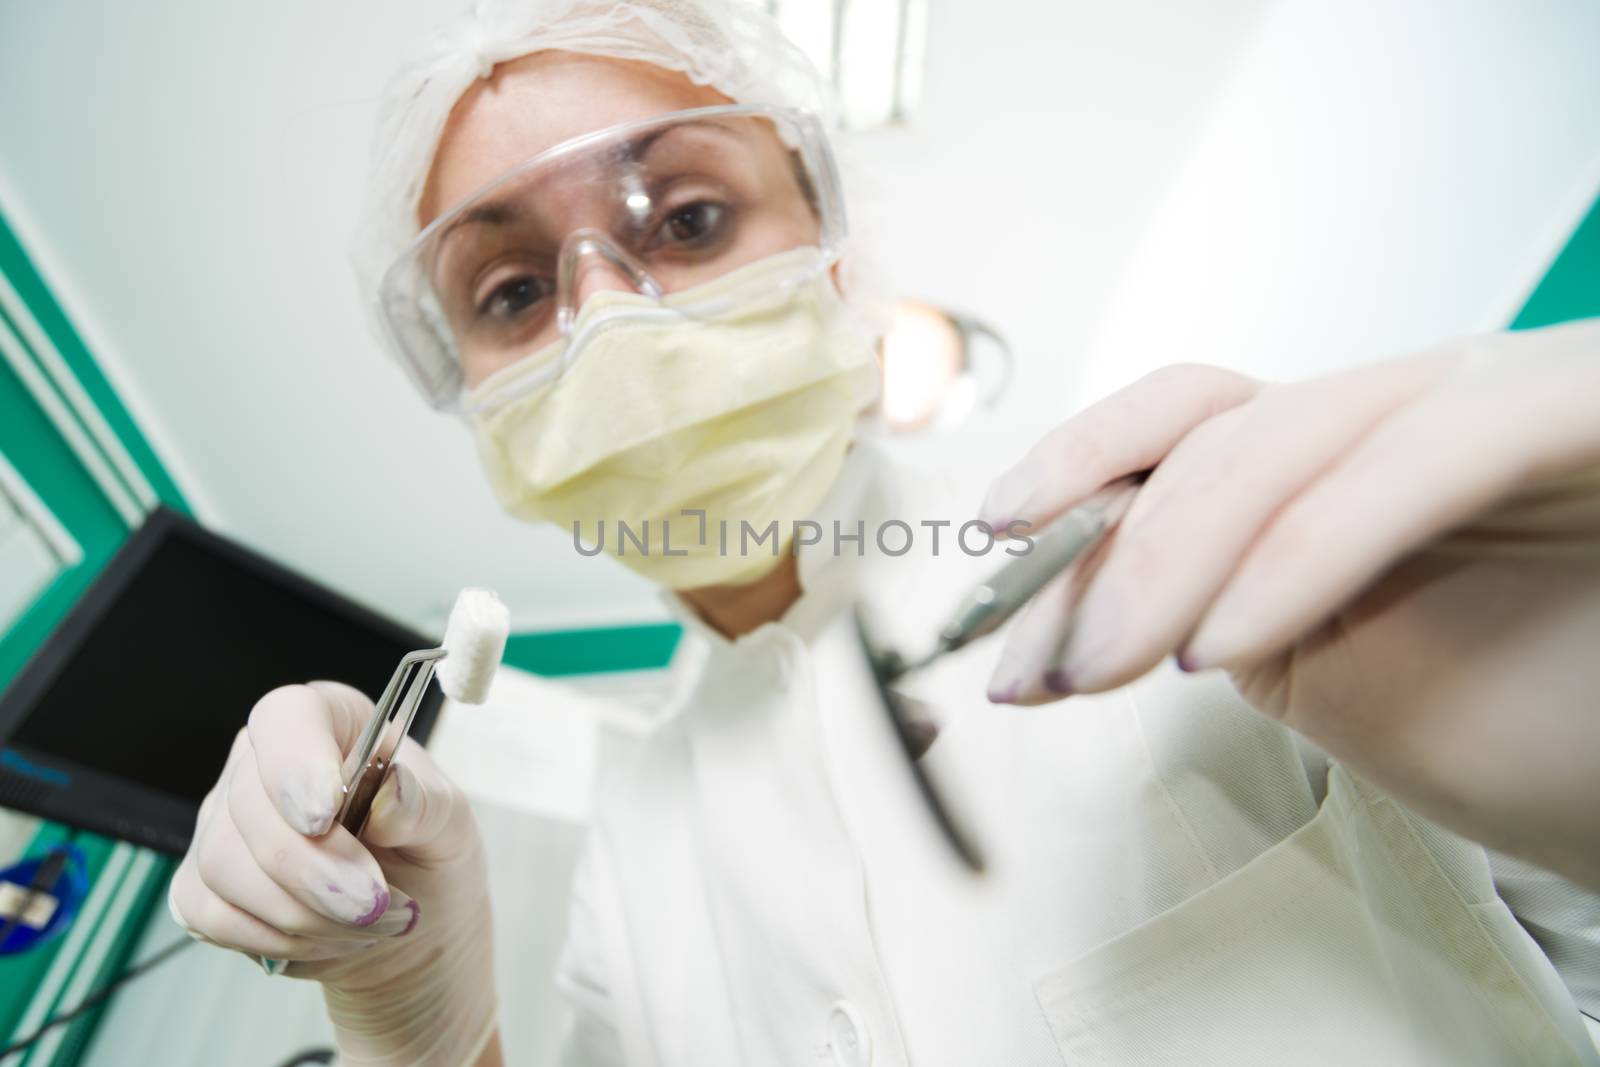 Dentist holding Dental Tweezers with coton pad and Angled Mirror for inspecting a patient. Selective Focus.